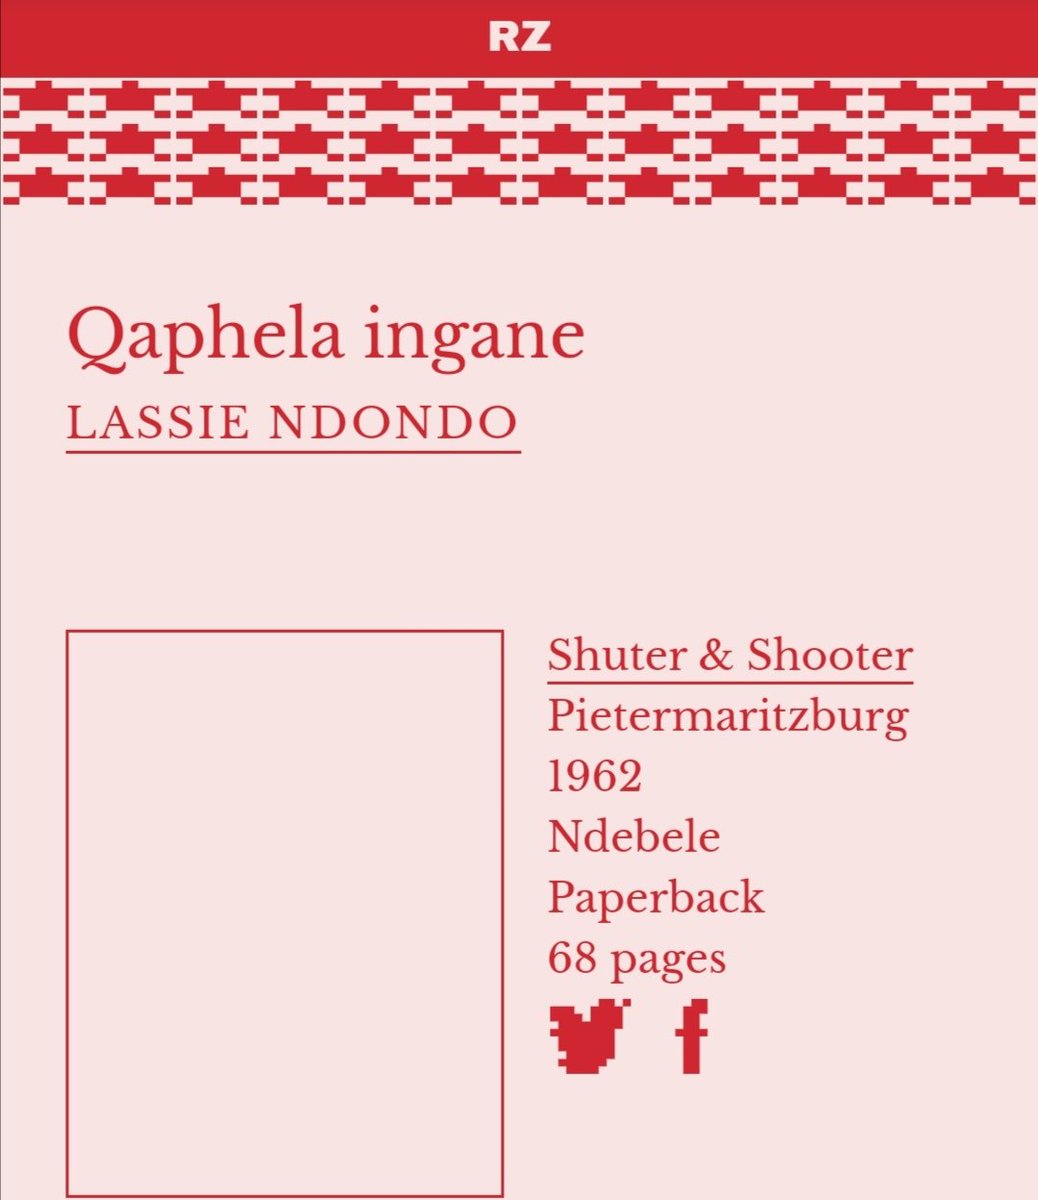 8. 1962 : Qaphela ingane : Lassie Ndondo. Lassie was the first Ndebele female writer to be published. (Please share more about her).